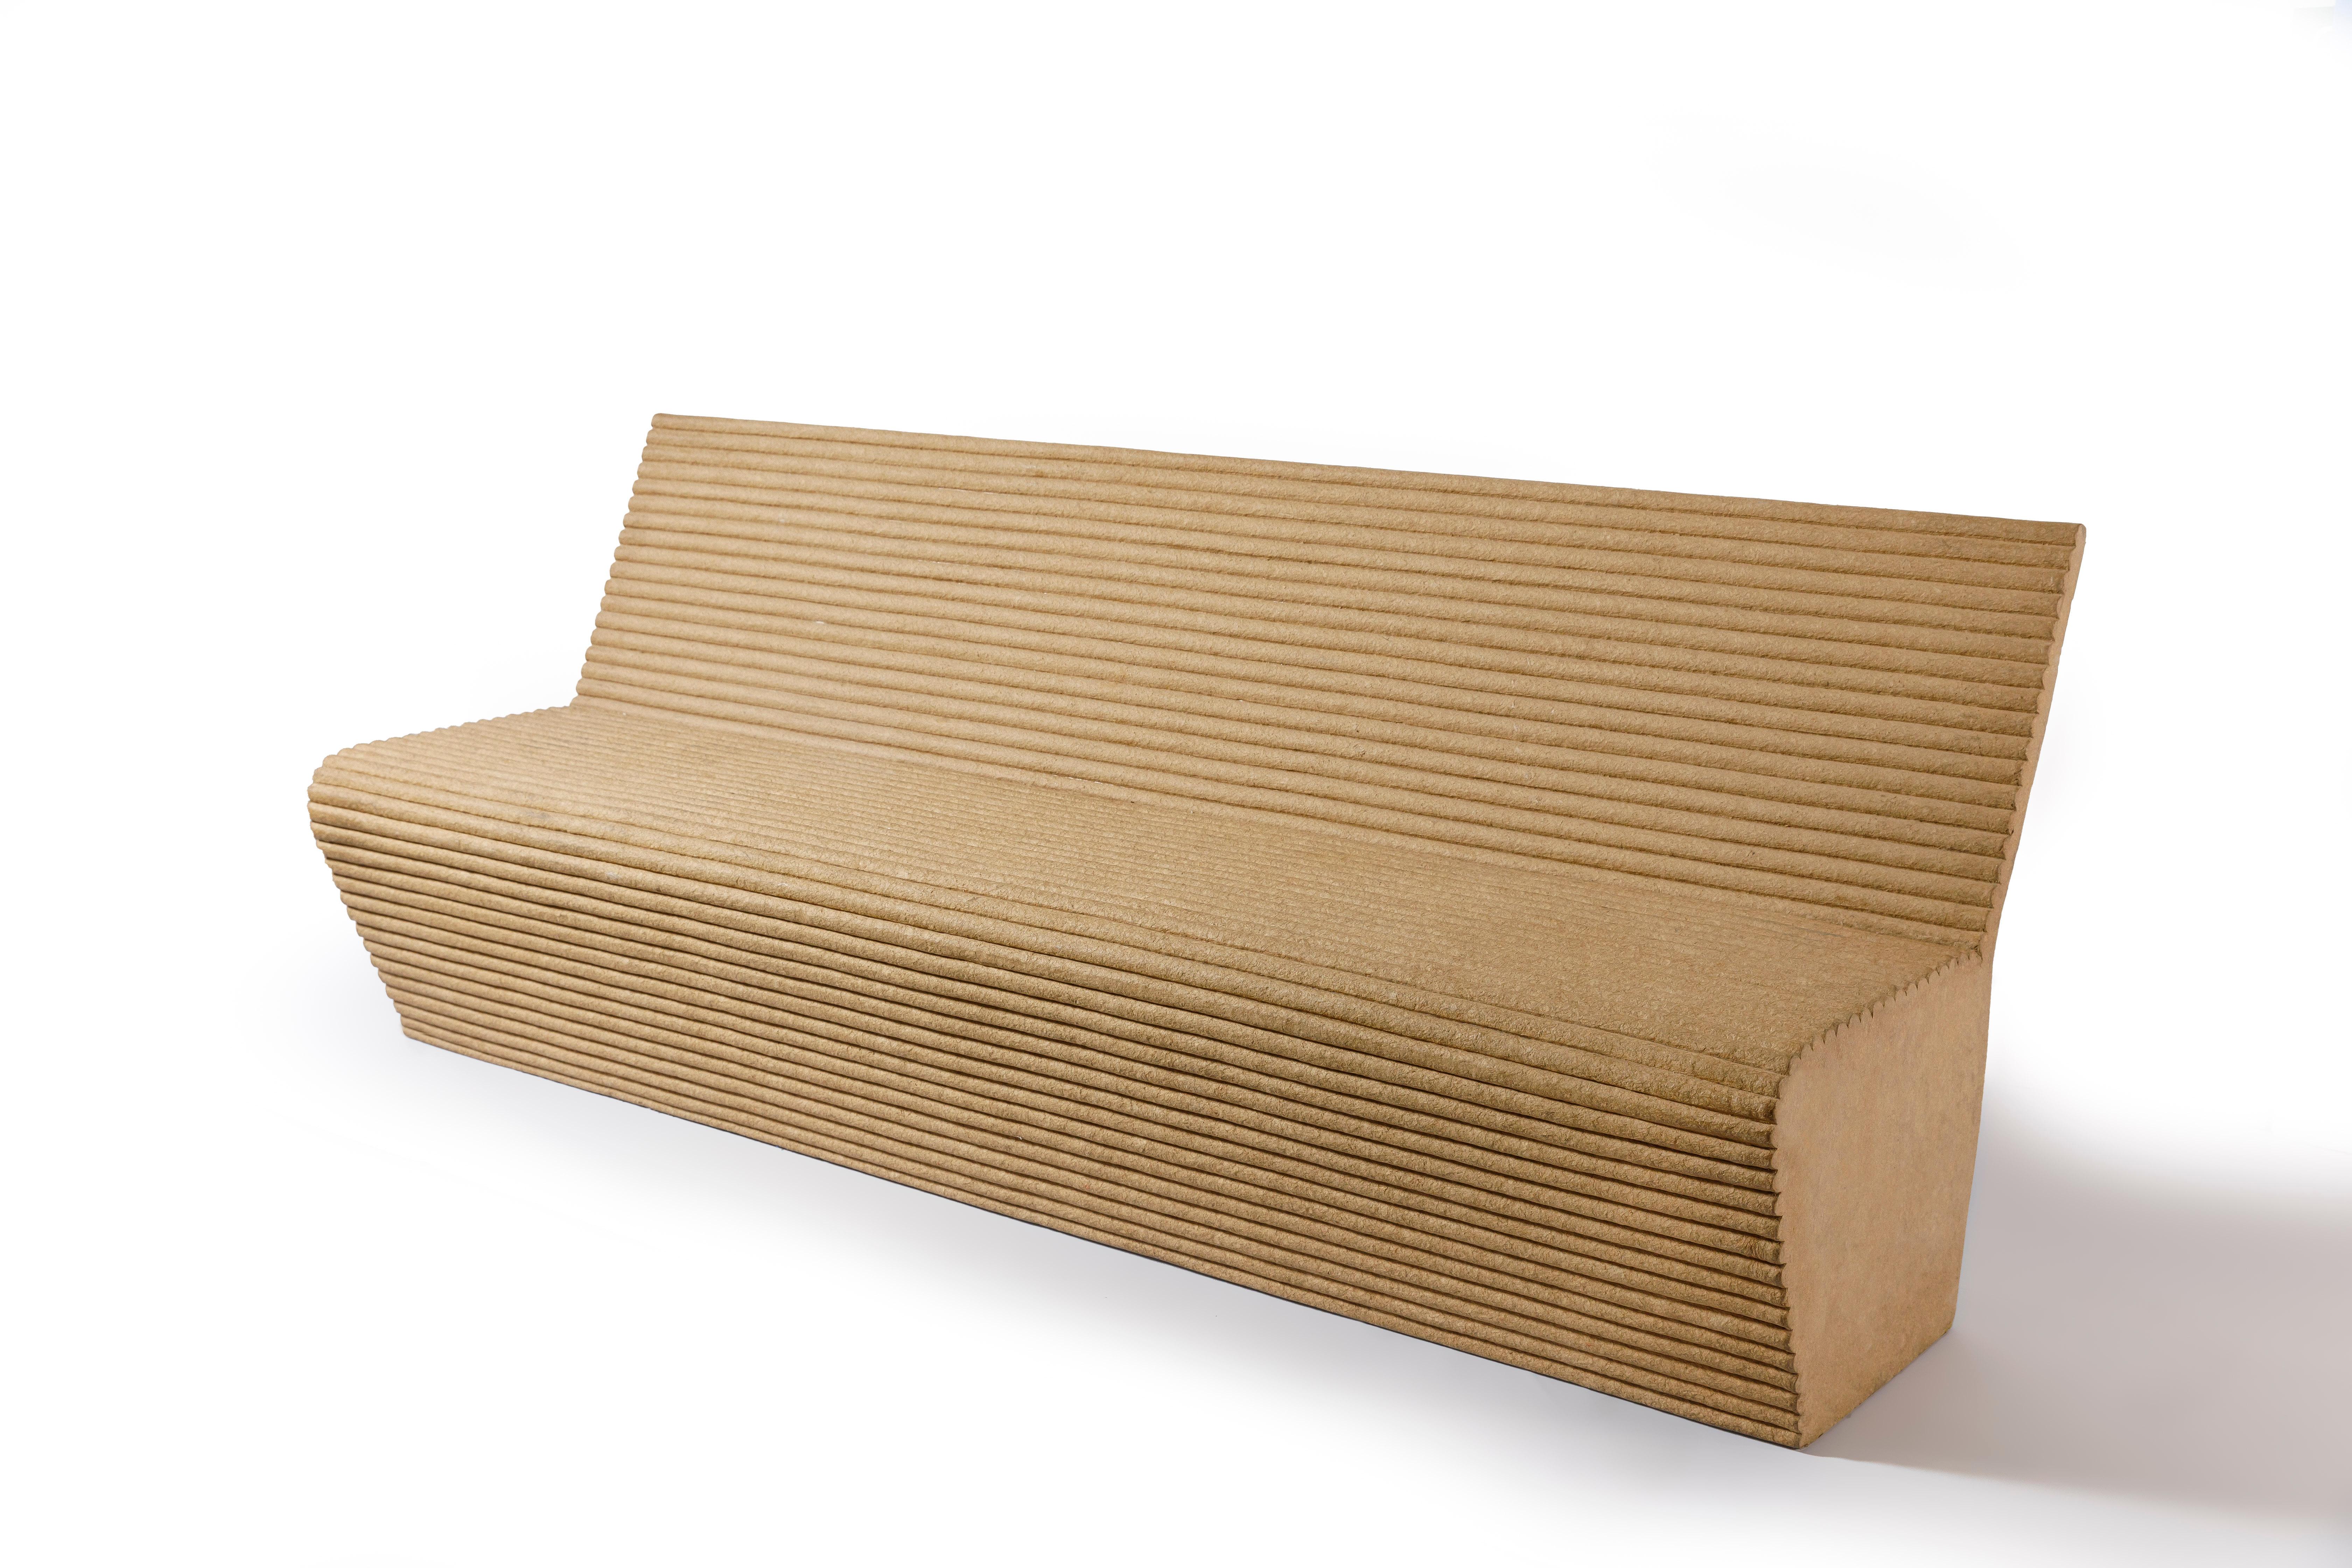 The Contemporary Estriado Bench by Domingos Tótora is a unique and stunning piece of furniture created in Brazil in 2014. The bench is made entirely of recycled cardboard, meticulously crafted into a series of vertical ribbons that are layered and